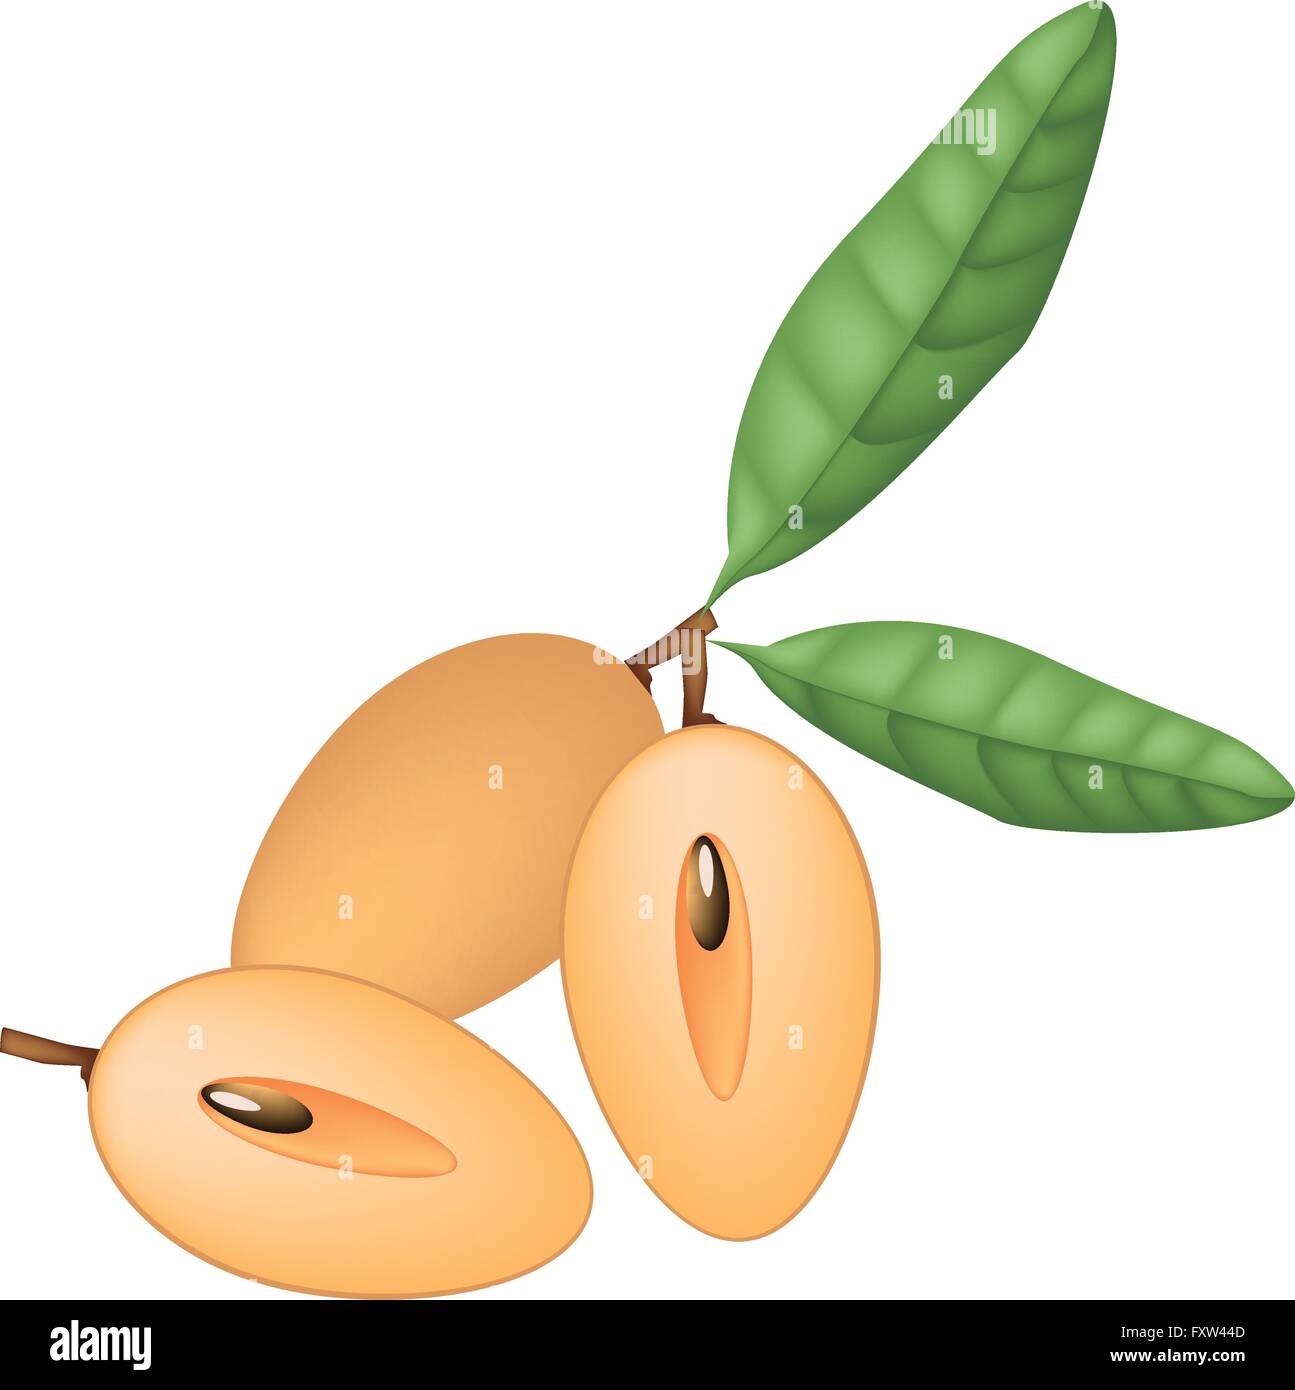 Illustration of Whole and Half Sapodilla Fruits Isolated on A White Background. Stock Vector